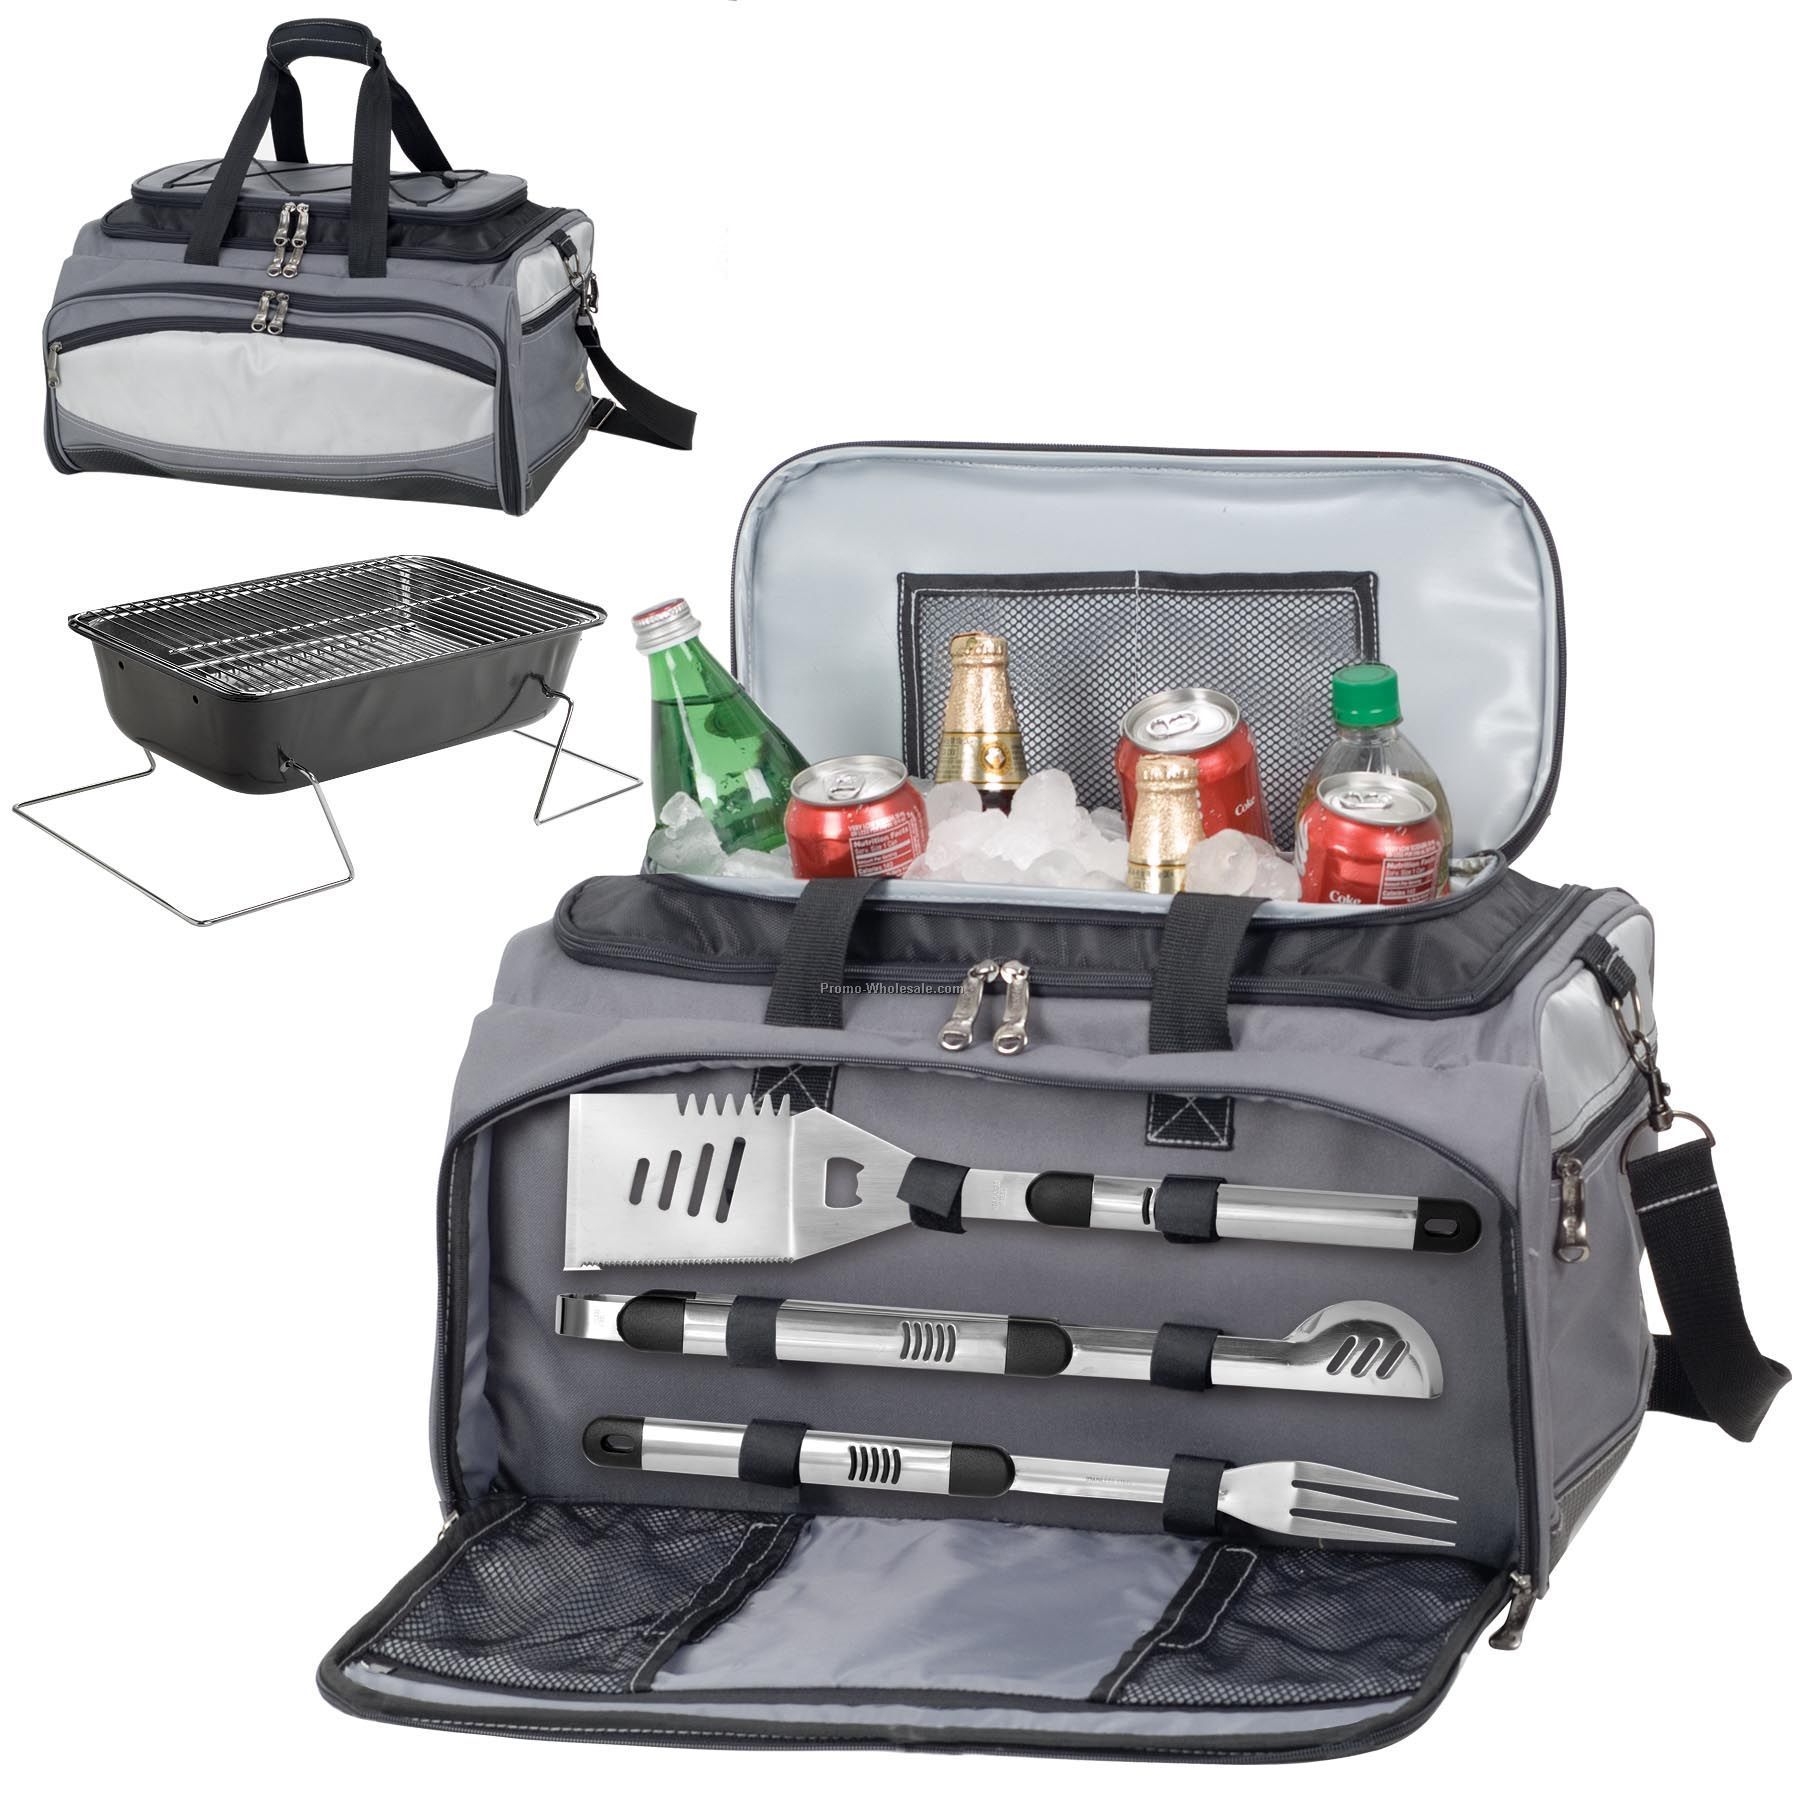 Buccaneer Tailgating Cooler With Grill & 3 Piece Bbq Tools